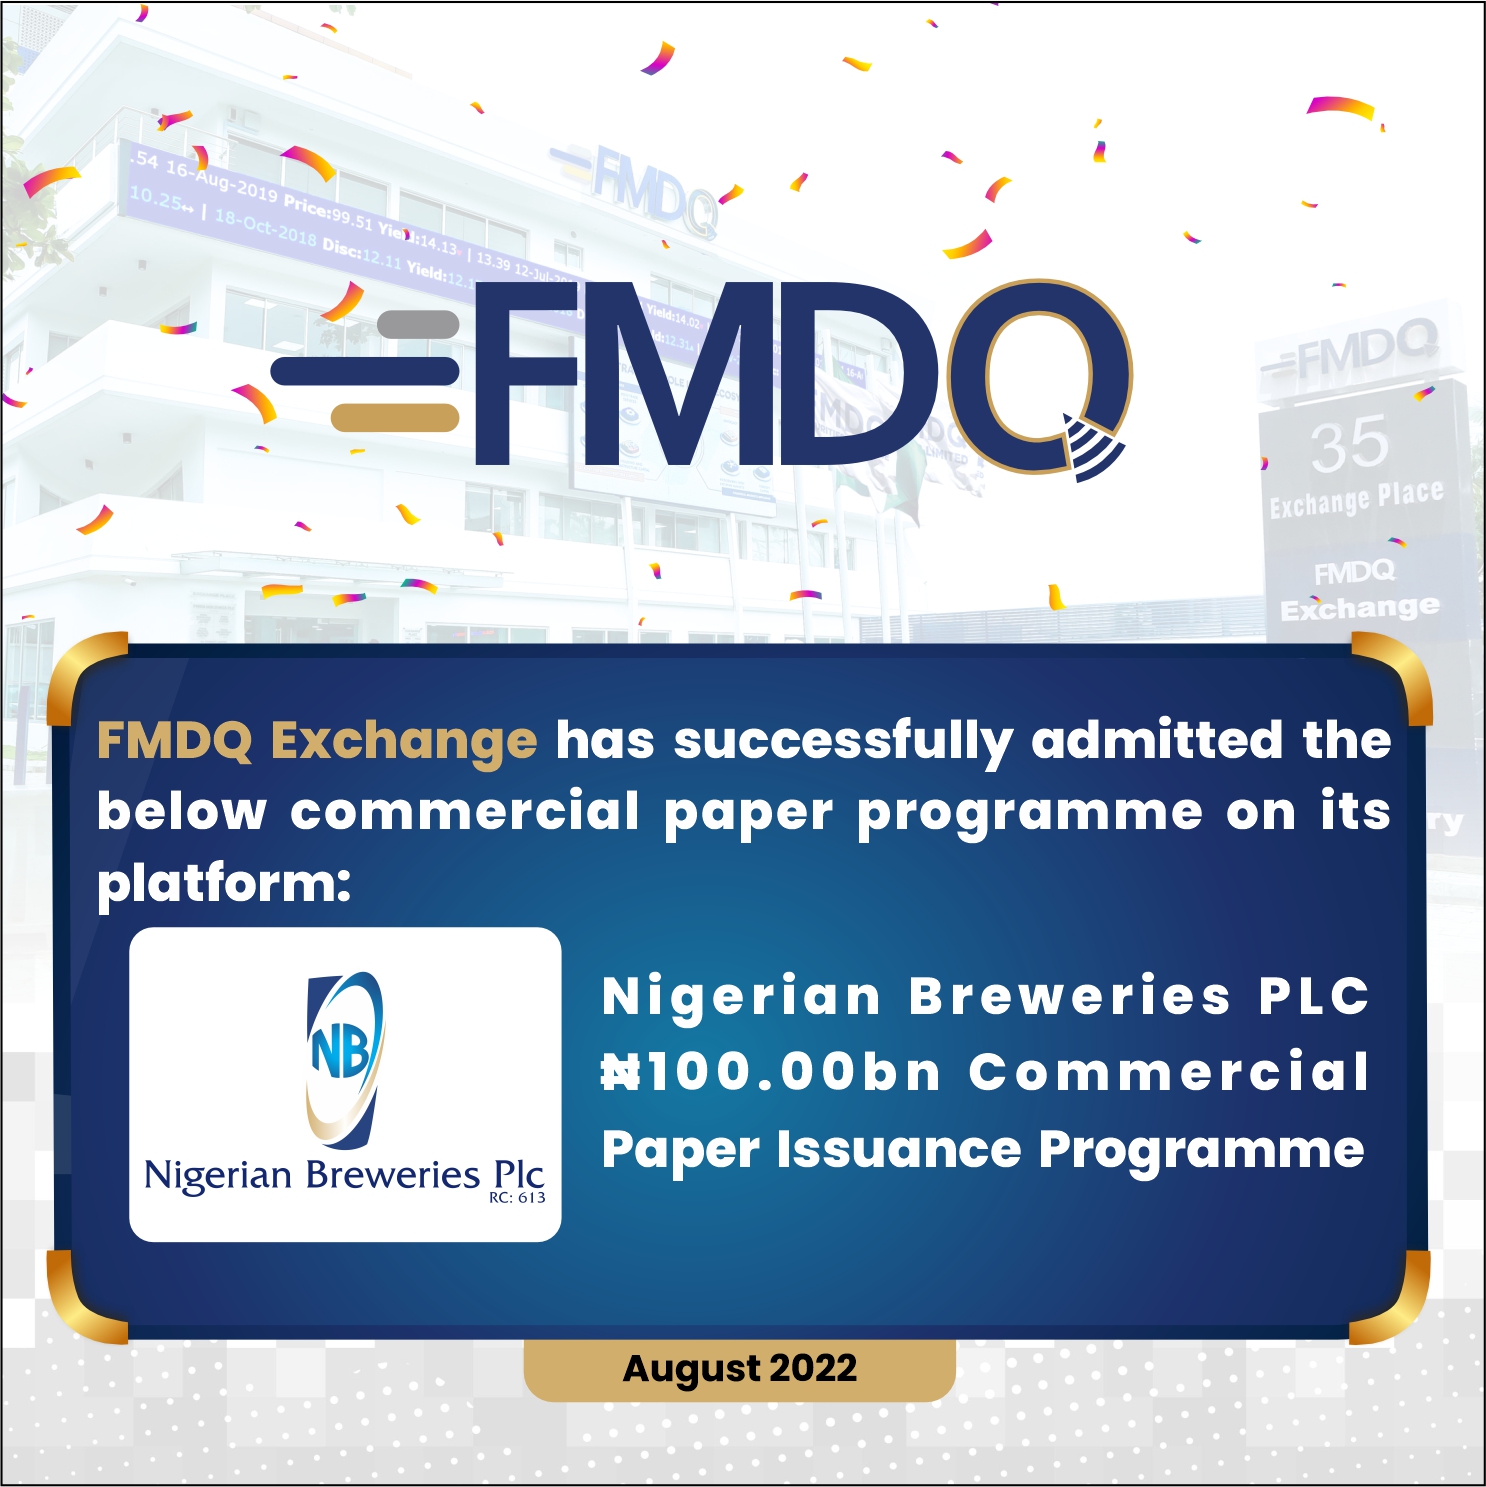 Nigerian Breweries PLC Registers ₦100b Commercial Paper Programme on FMDQ Exchange